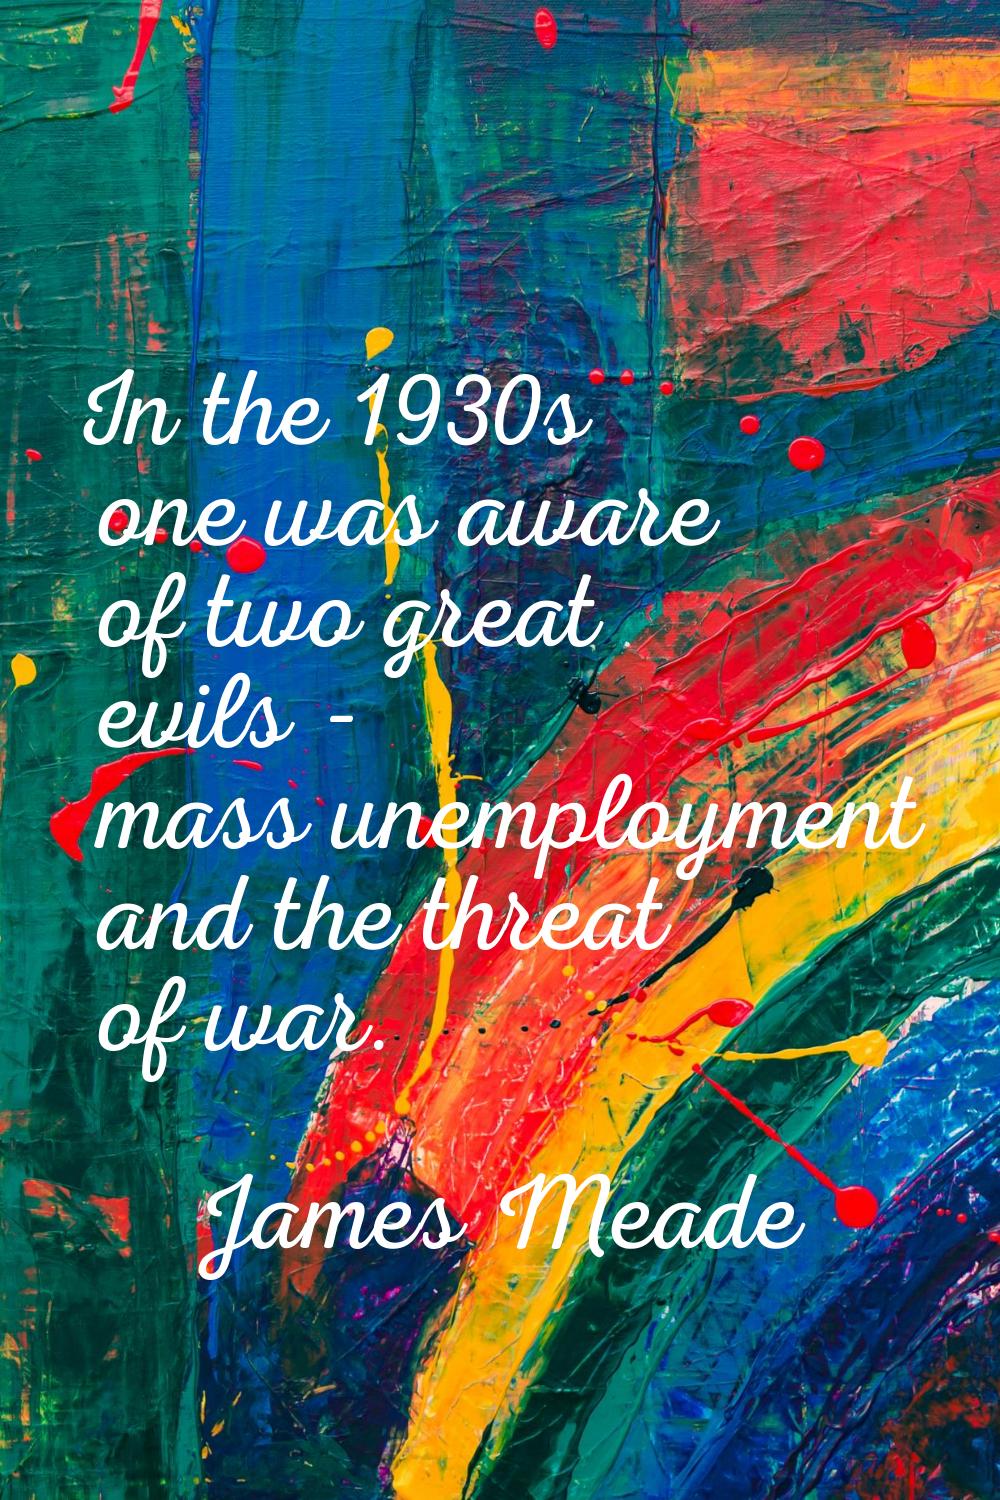 In the 1930s one was aware of two great evils - mass unemployment and the threat of war.